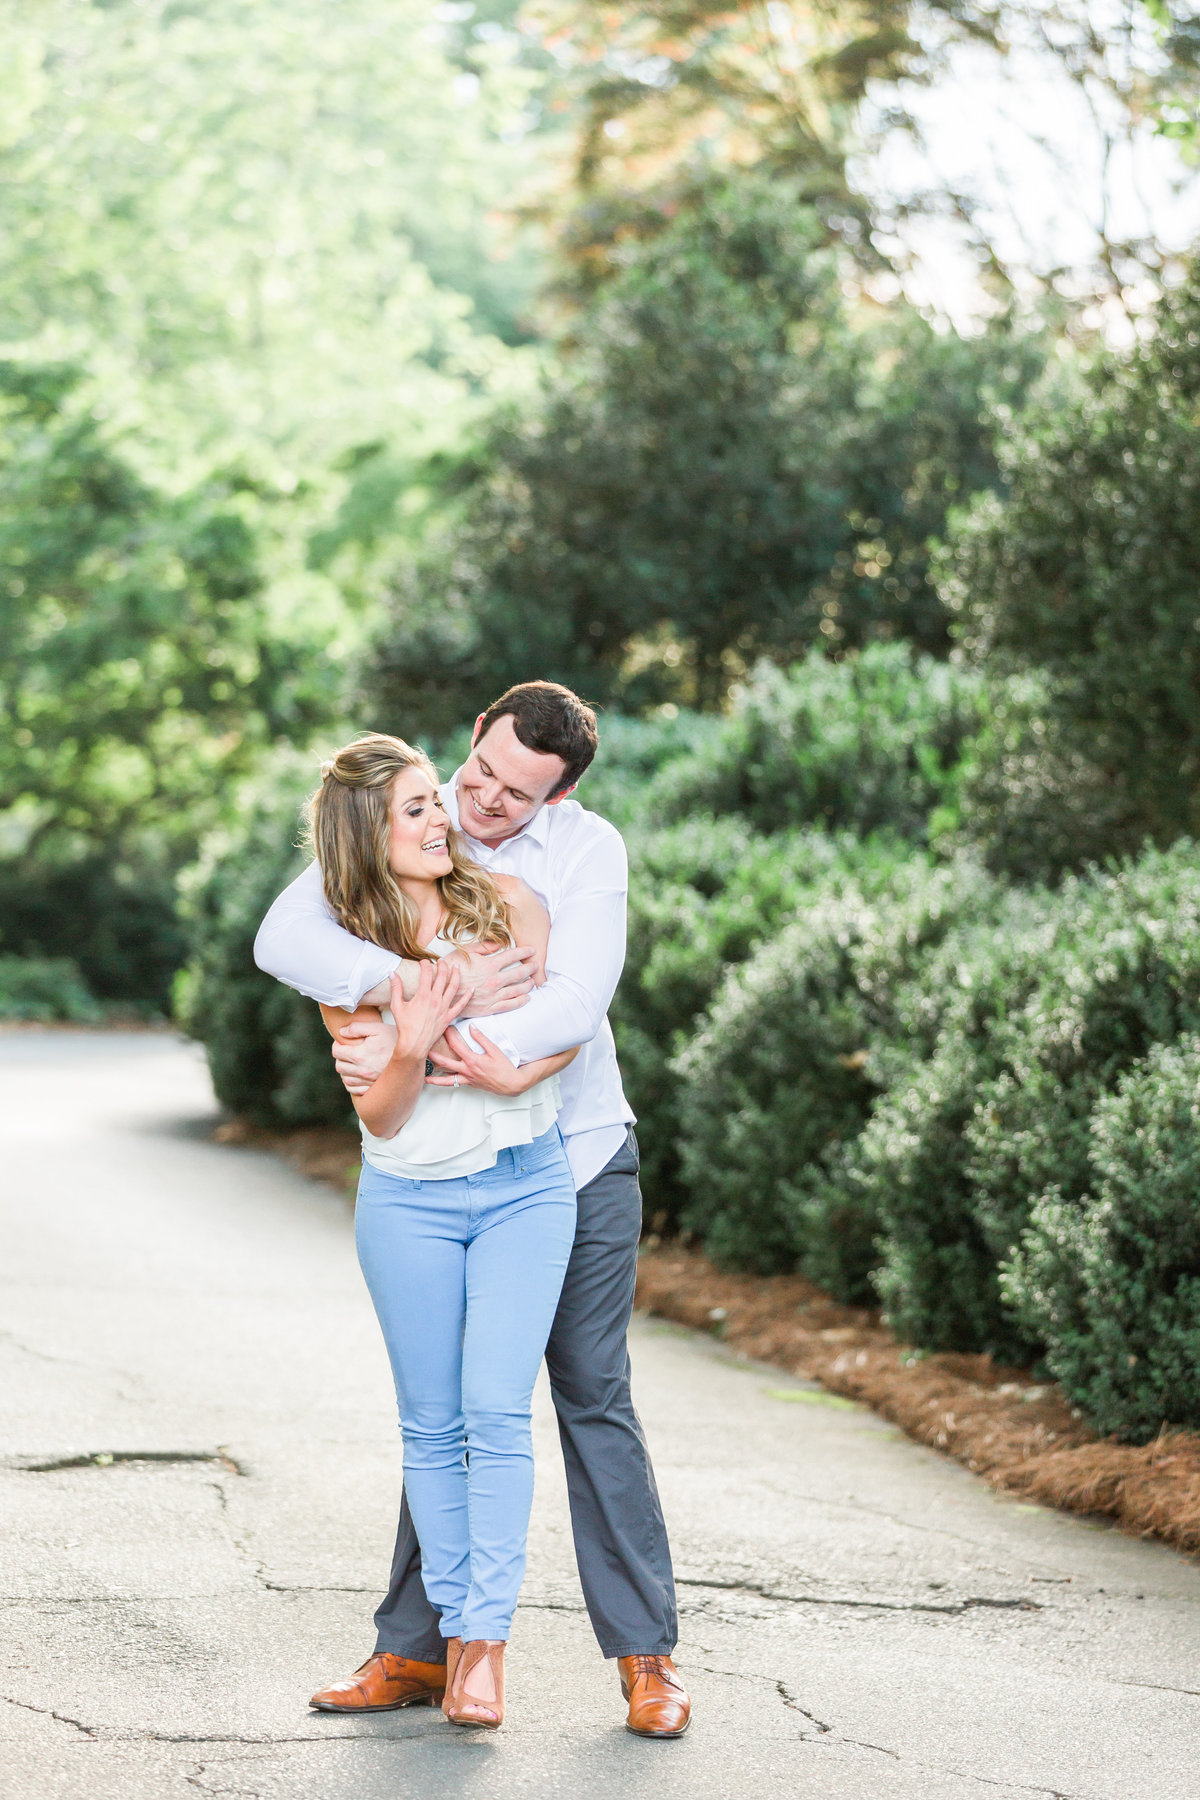 Noelle and Gregg Engaged-Samantha Laffoon Photography-178